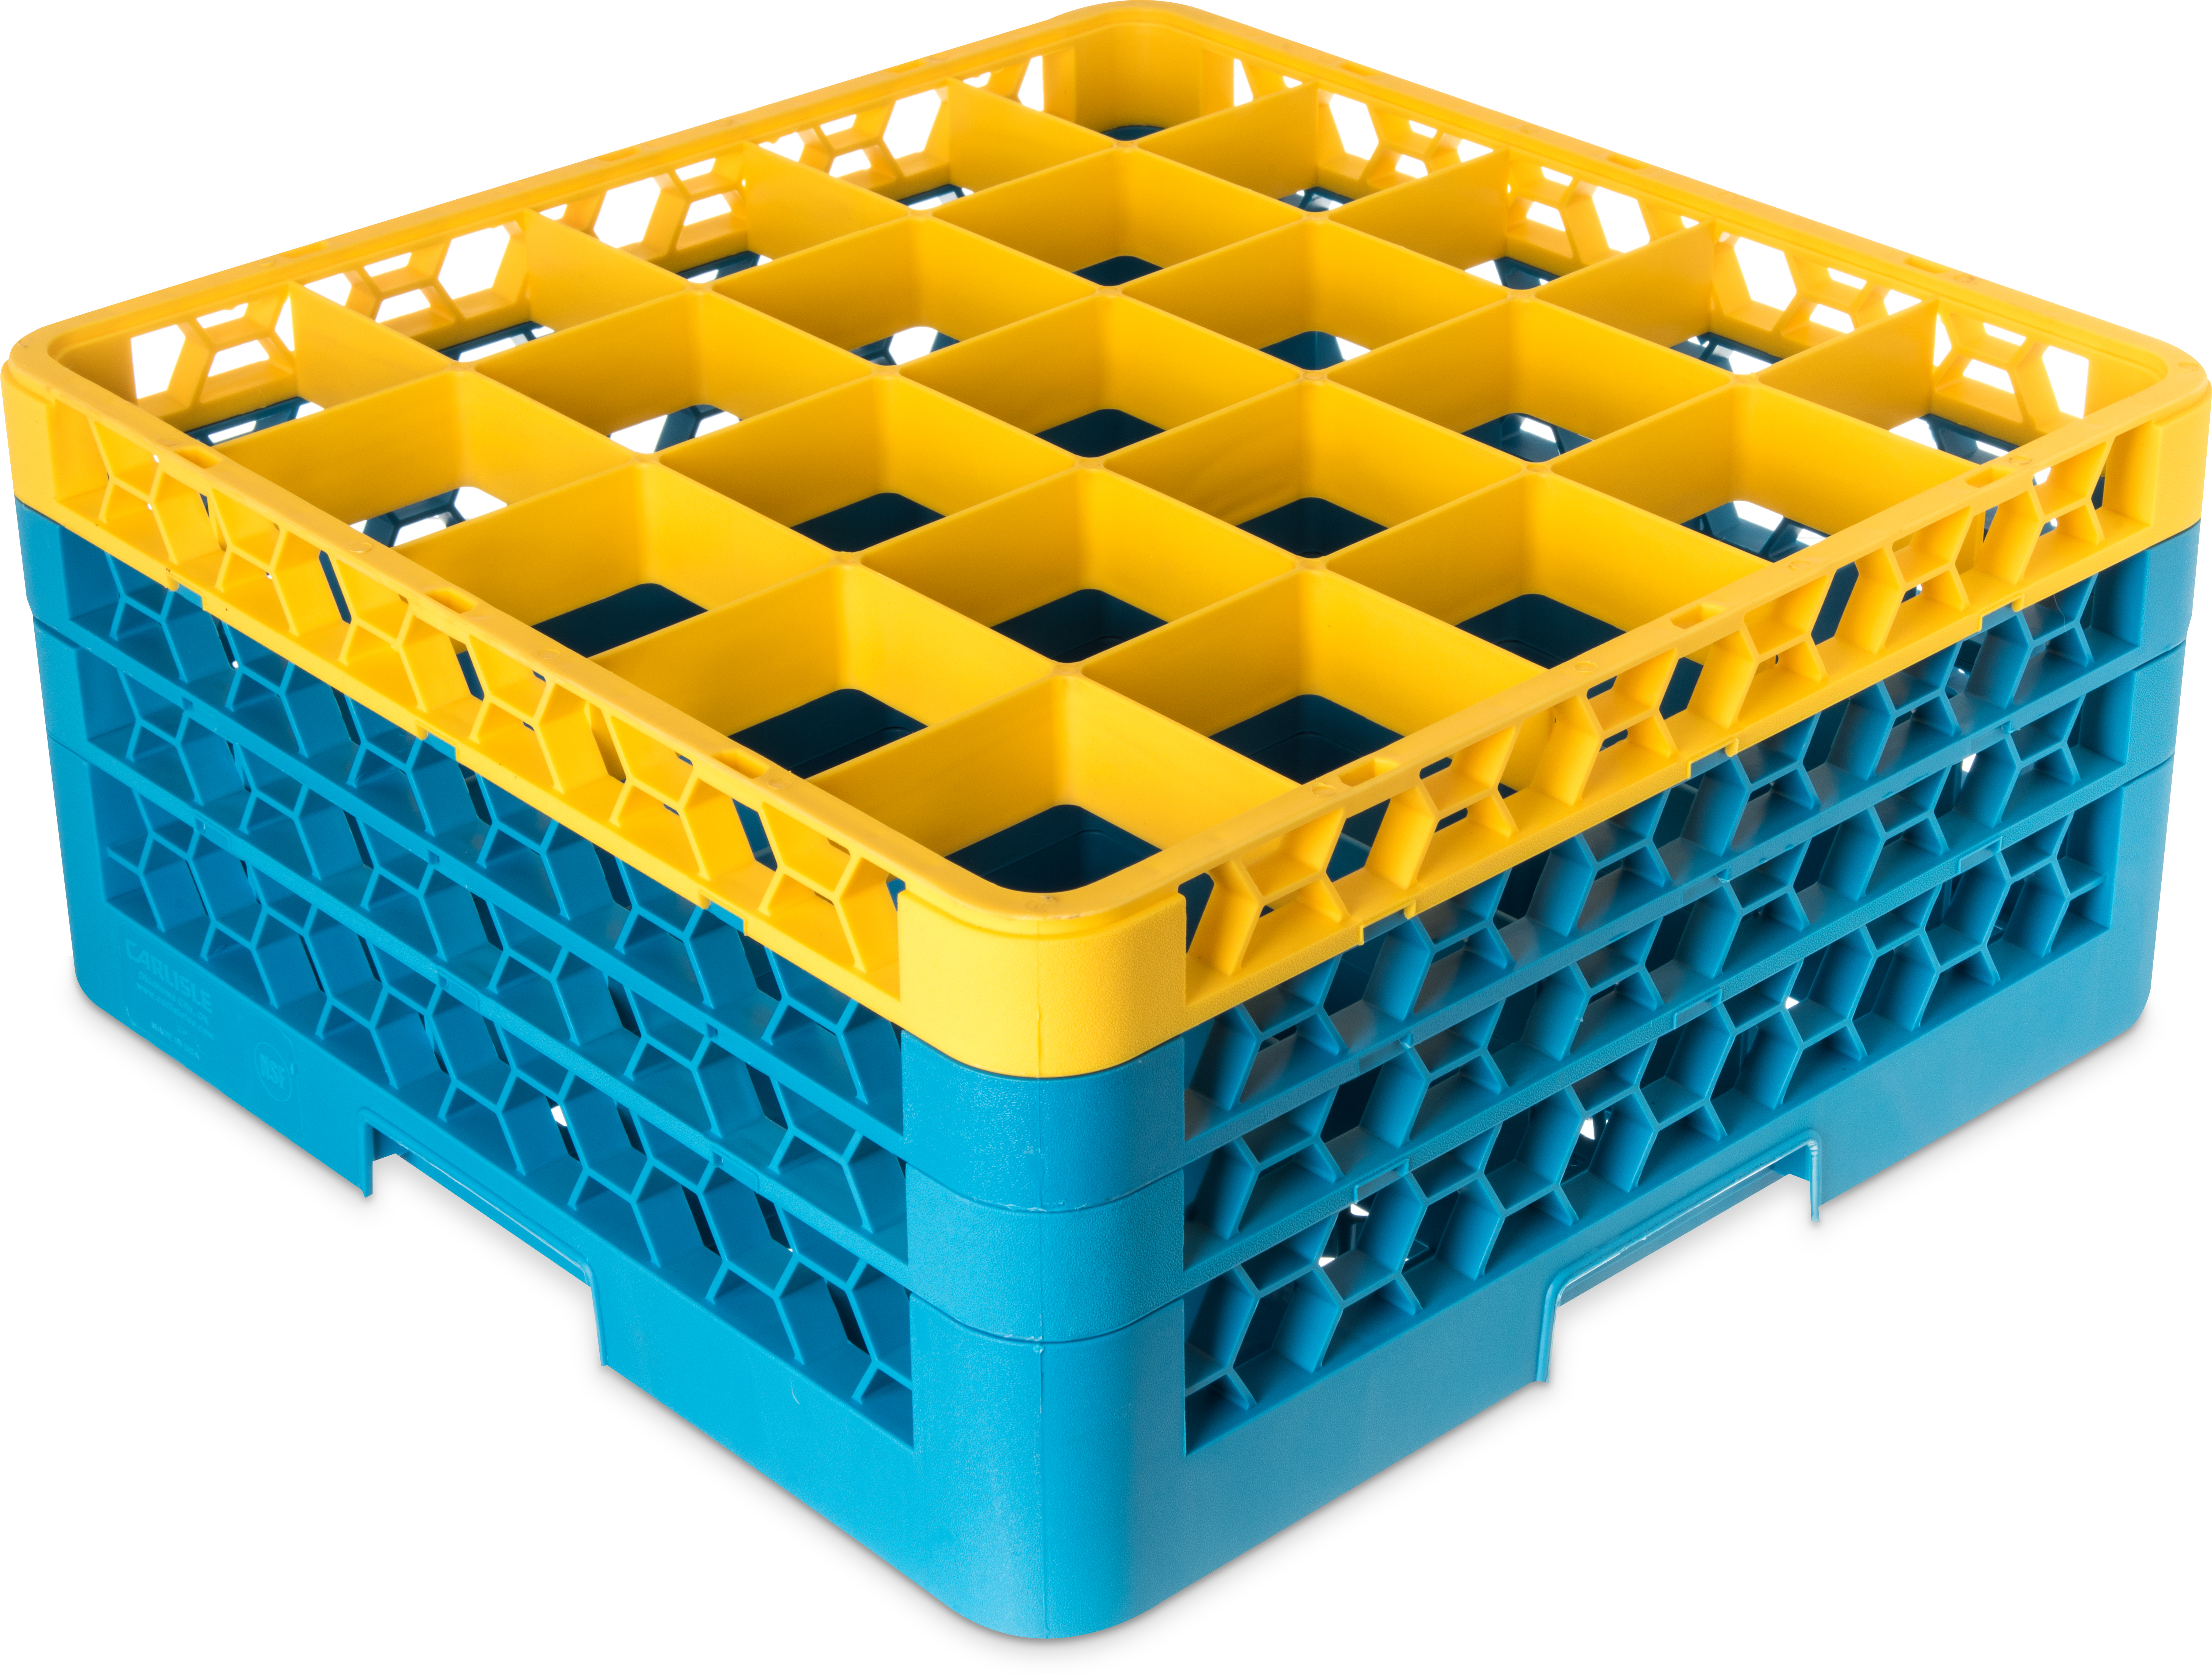 OptiClean 25 Compartment Glass Rack with 3 Extenders 8.72 - Yellow-Carlisle Blue